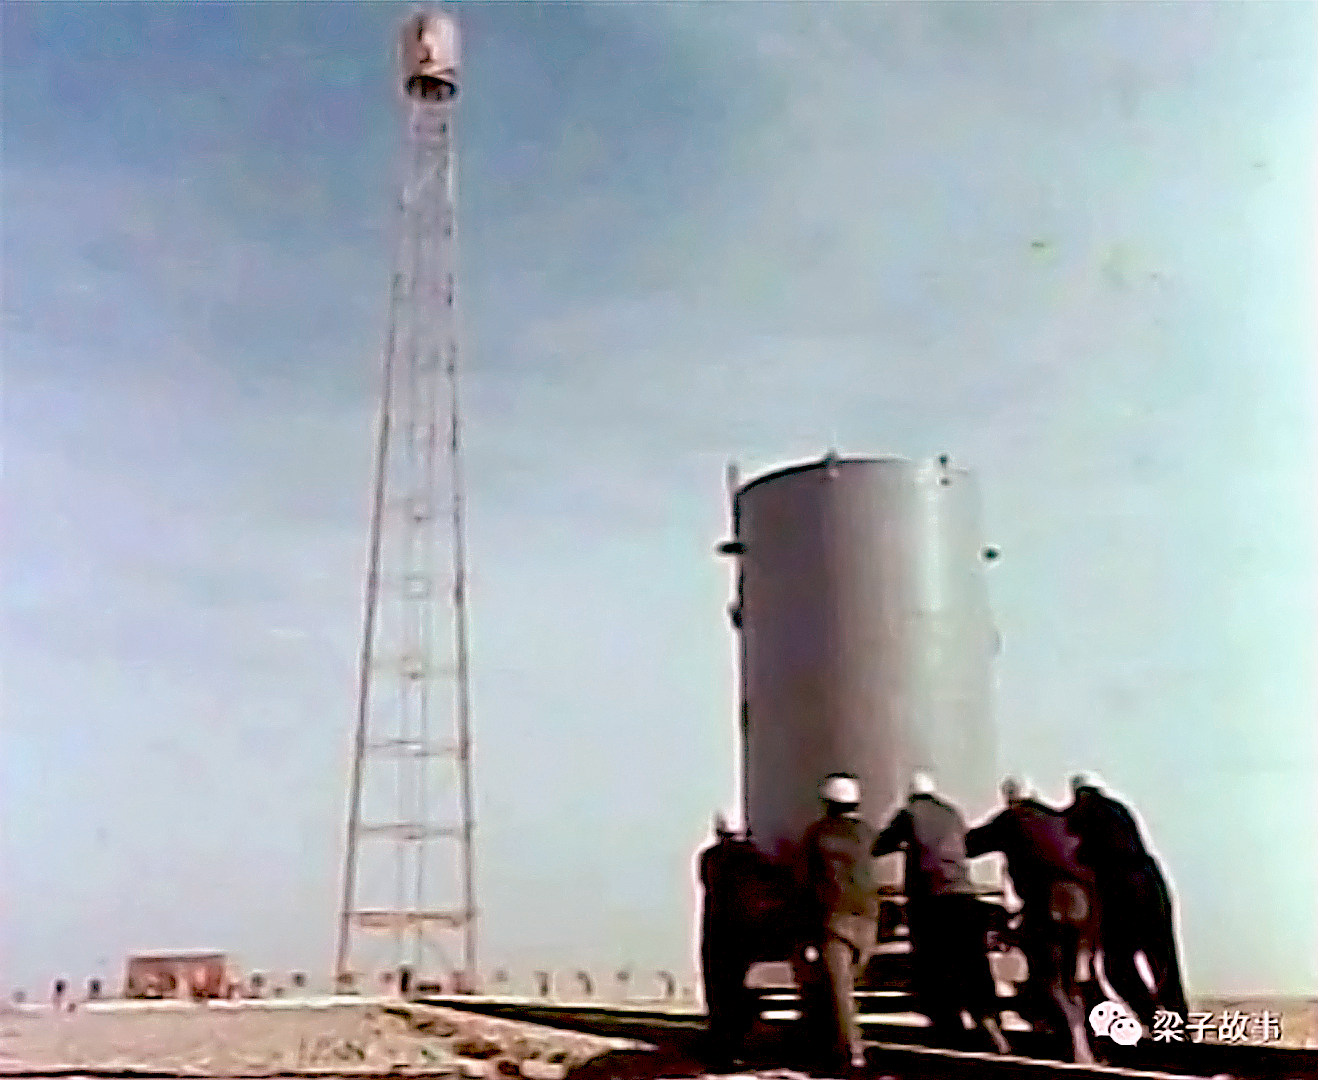 A large canister containing device 629 is moved to the 102-meter-tall tower on December 26, 1966. (Credit: Xie Jianyan / The story of Liangzi website)